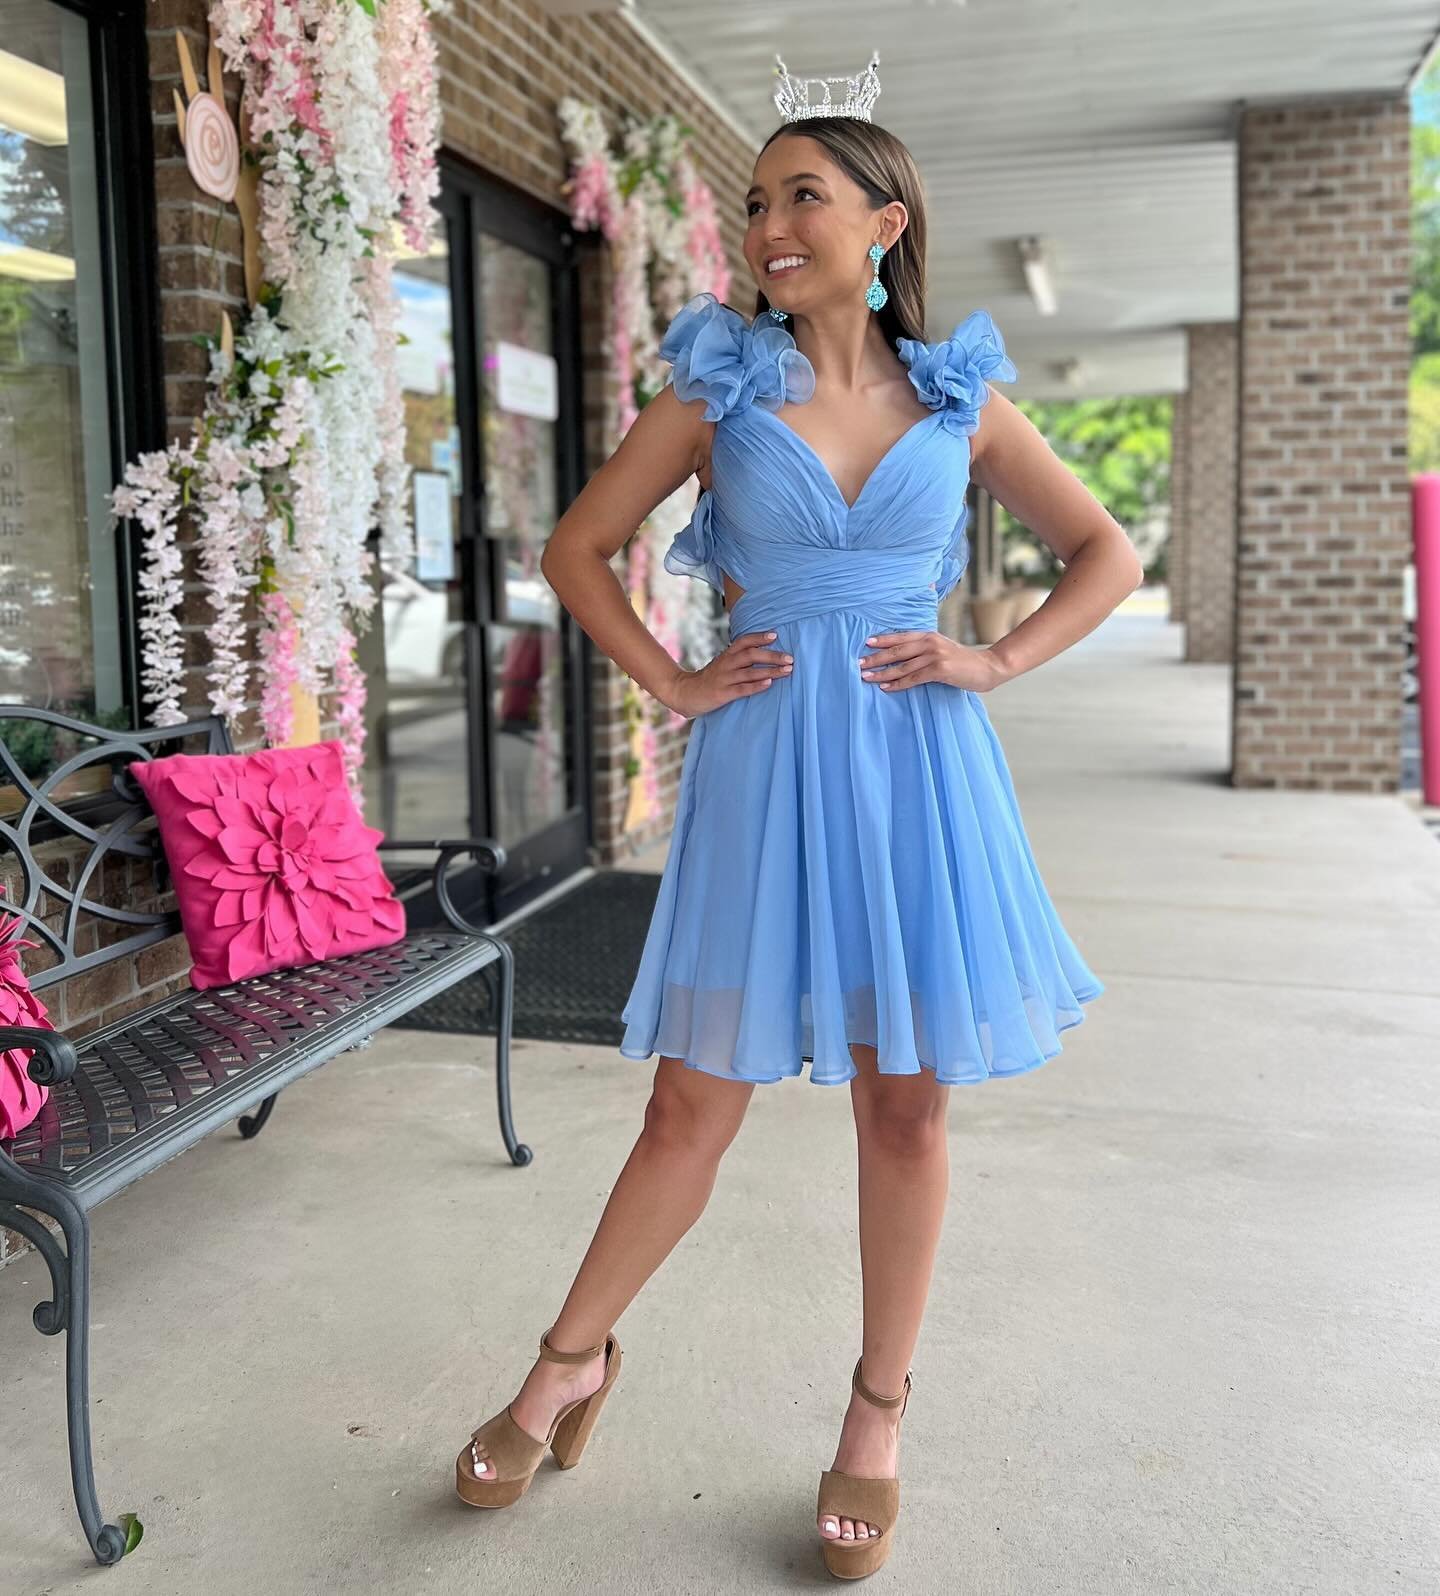 If summer was a dress!!! 💙 We are in love with this new @jovanifashions cocktail!!! Shop in store now!!! #AATRNC 

#aatrnc #aatr #dresses #dress #fayettevillenc #northcarolina #raleigh #charlotte #durham #prom #wilmington #concord #southcarolina #dr